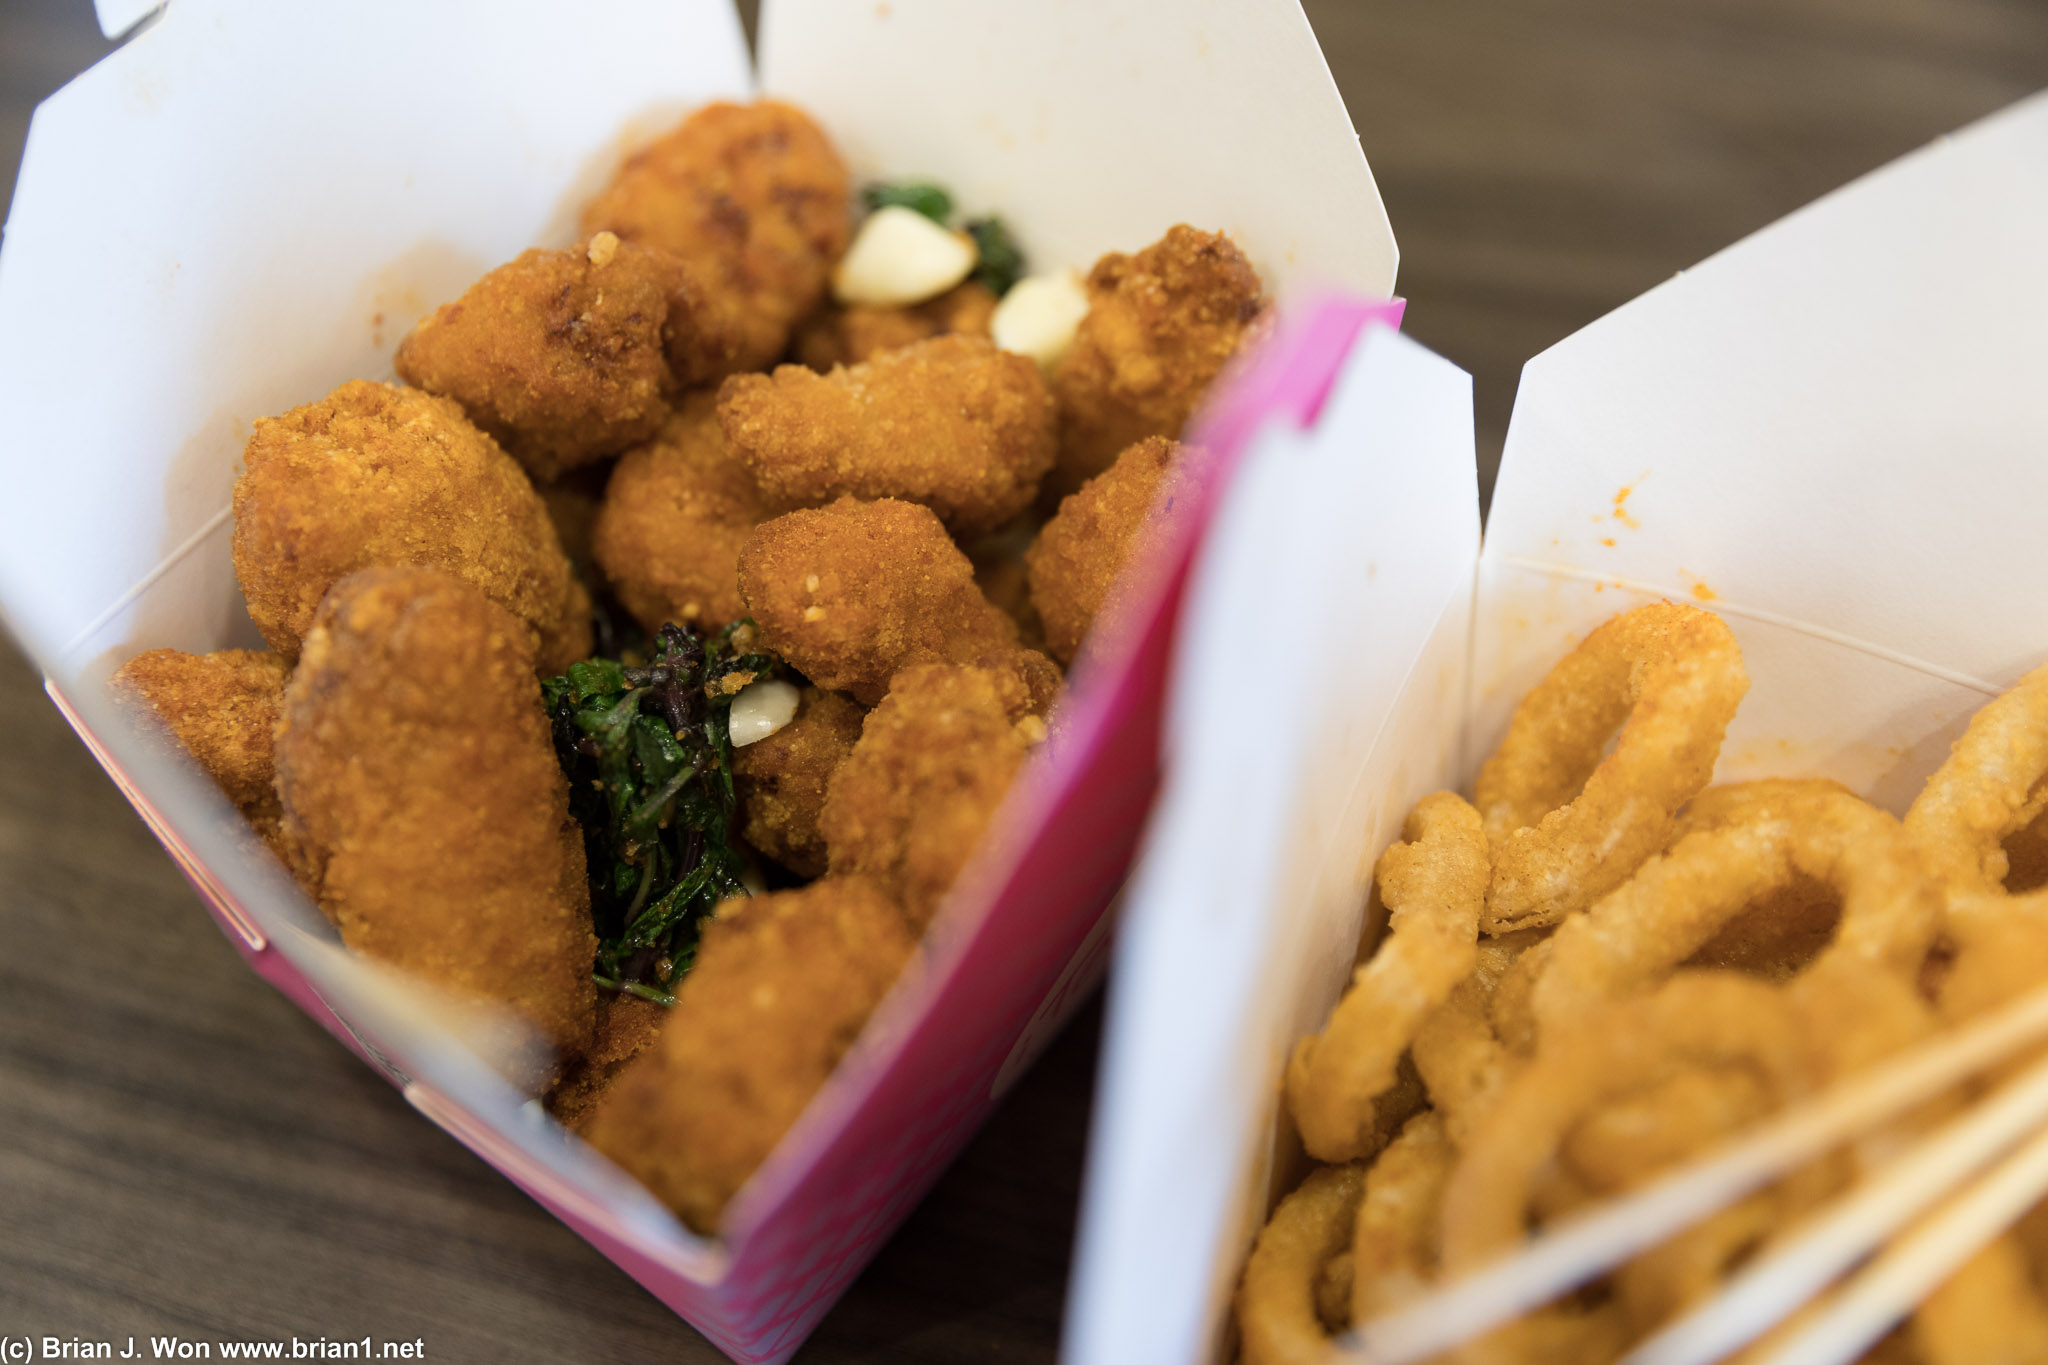 Popcorn chicken and squid rings at i-Tea.